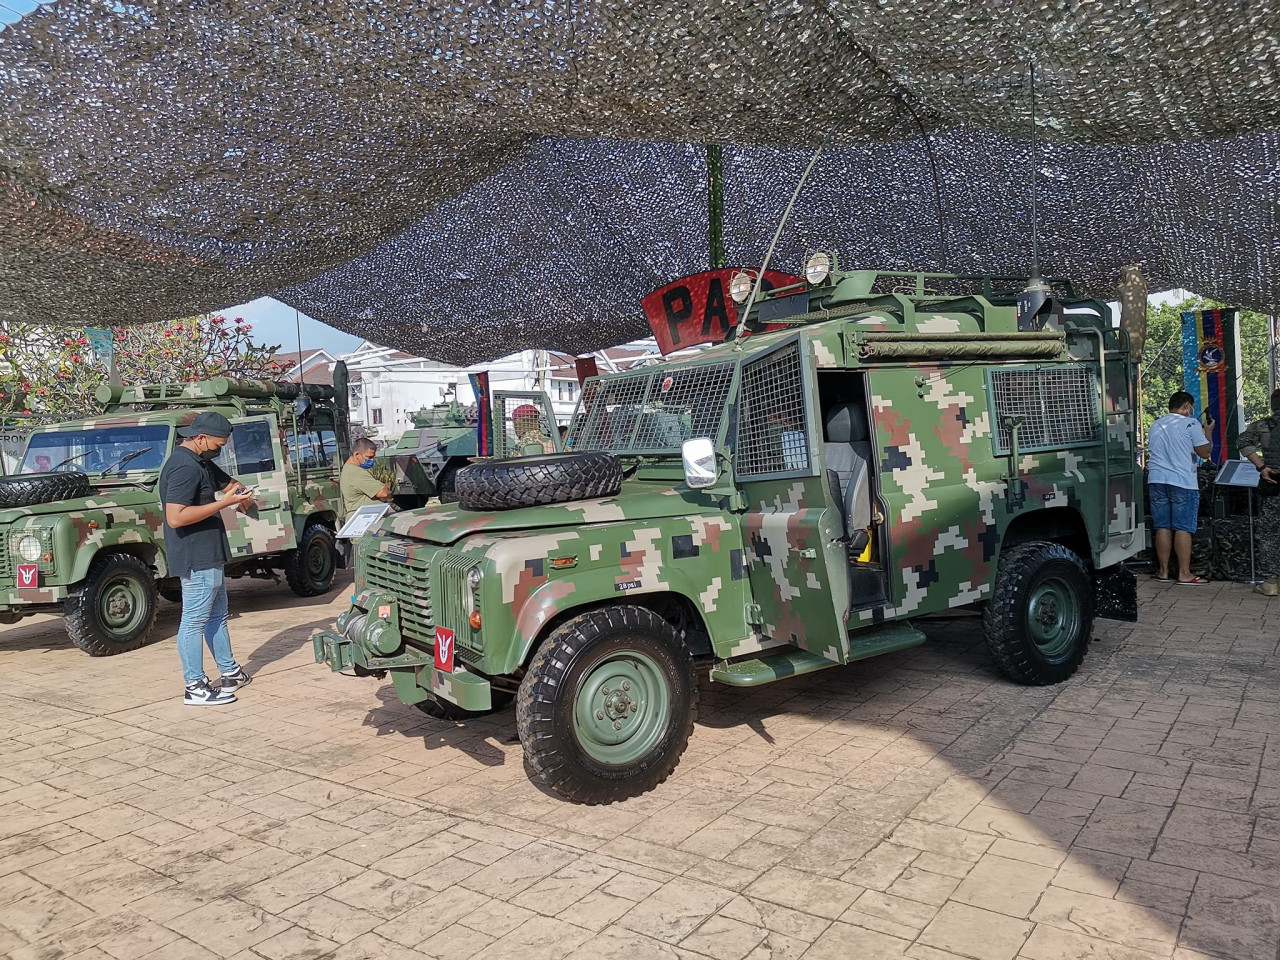 Military jeeps on display at the army museum.